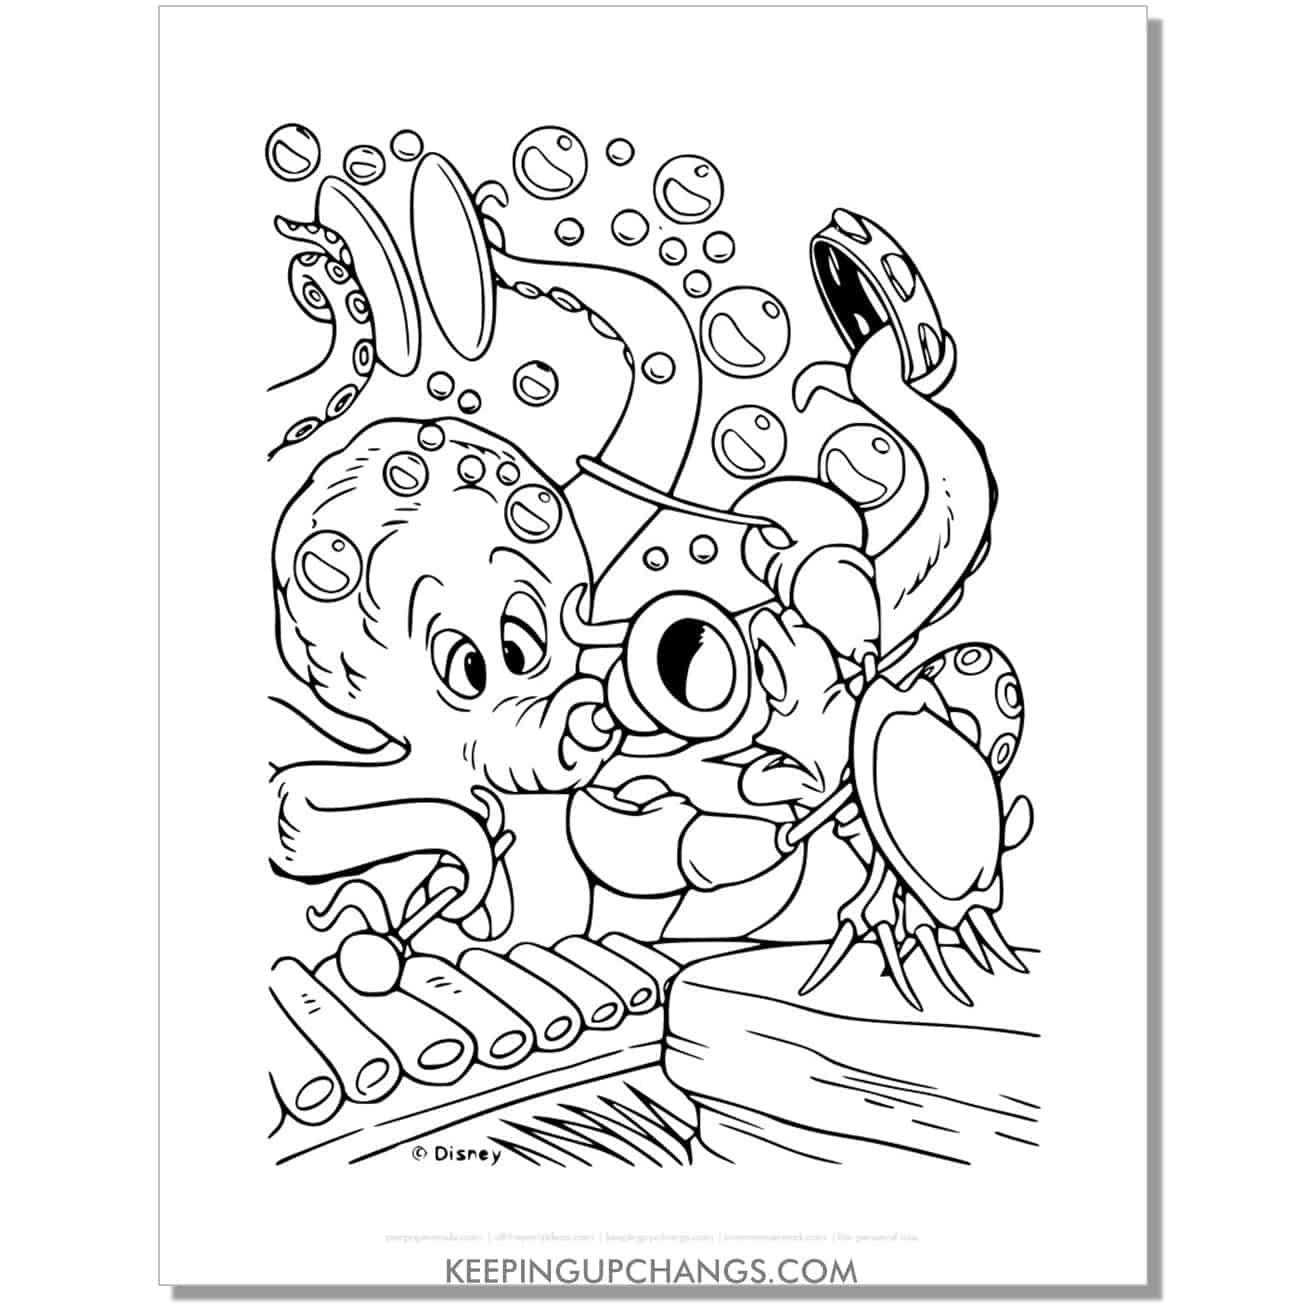 little mermaid sebastian with octopus symphony coloring page, sheet.